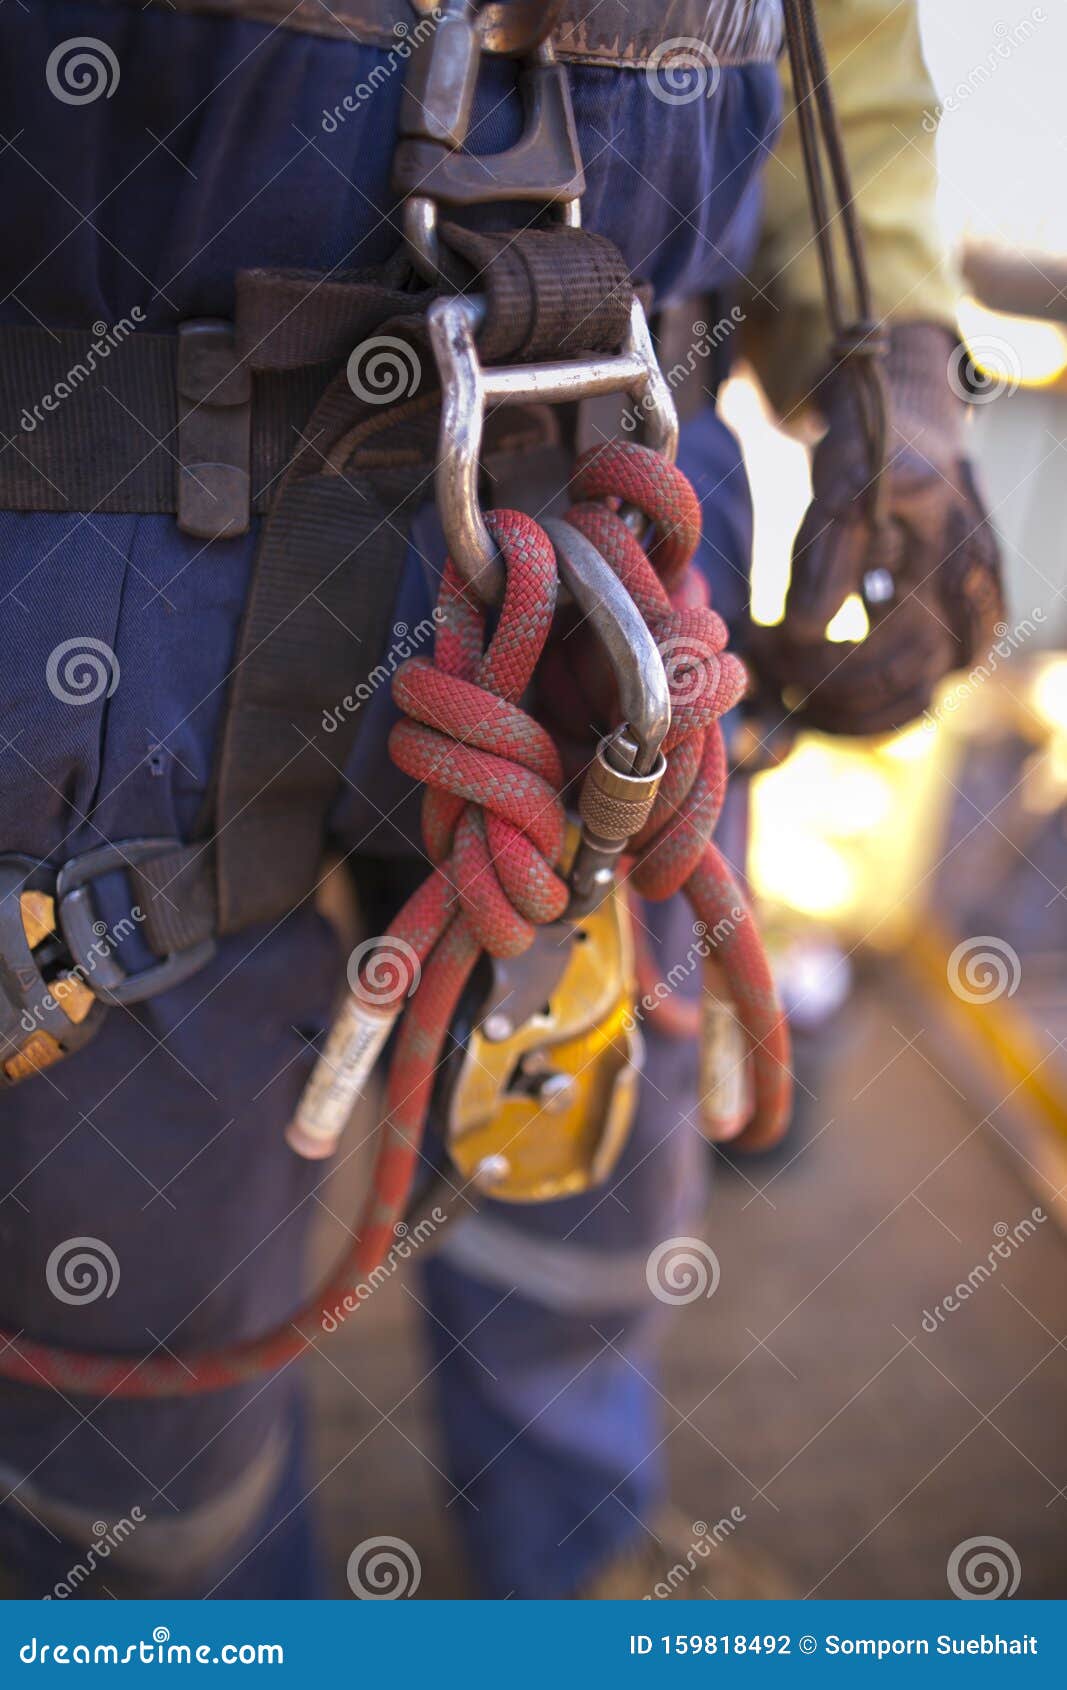 the red dynamic nylon ropes, fasten with figure of eights knot attaching, secure into aluminium rope access safety descender